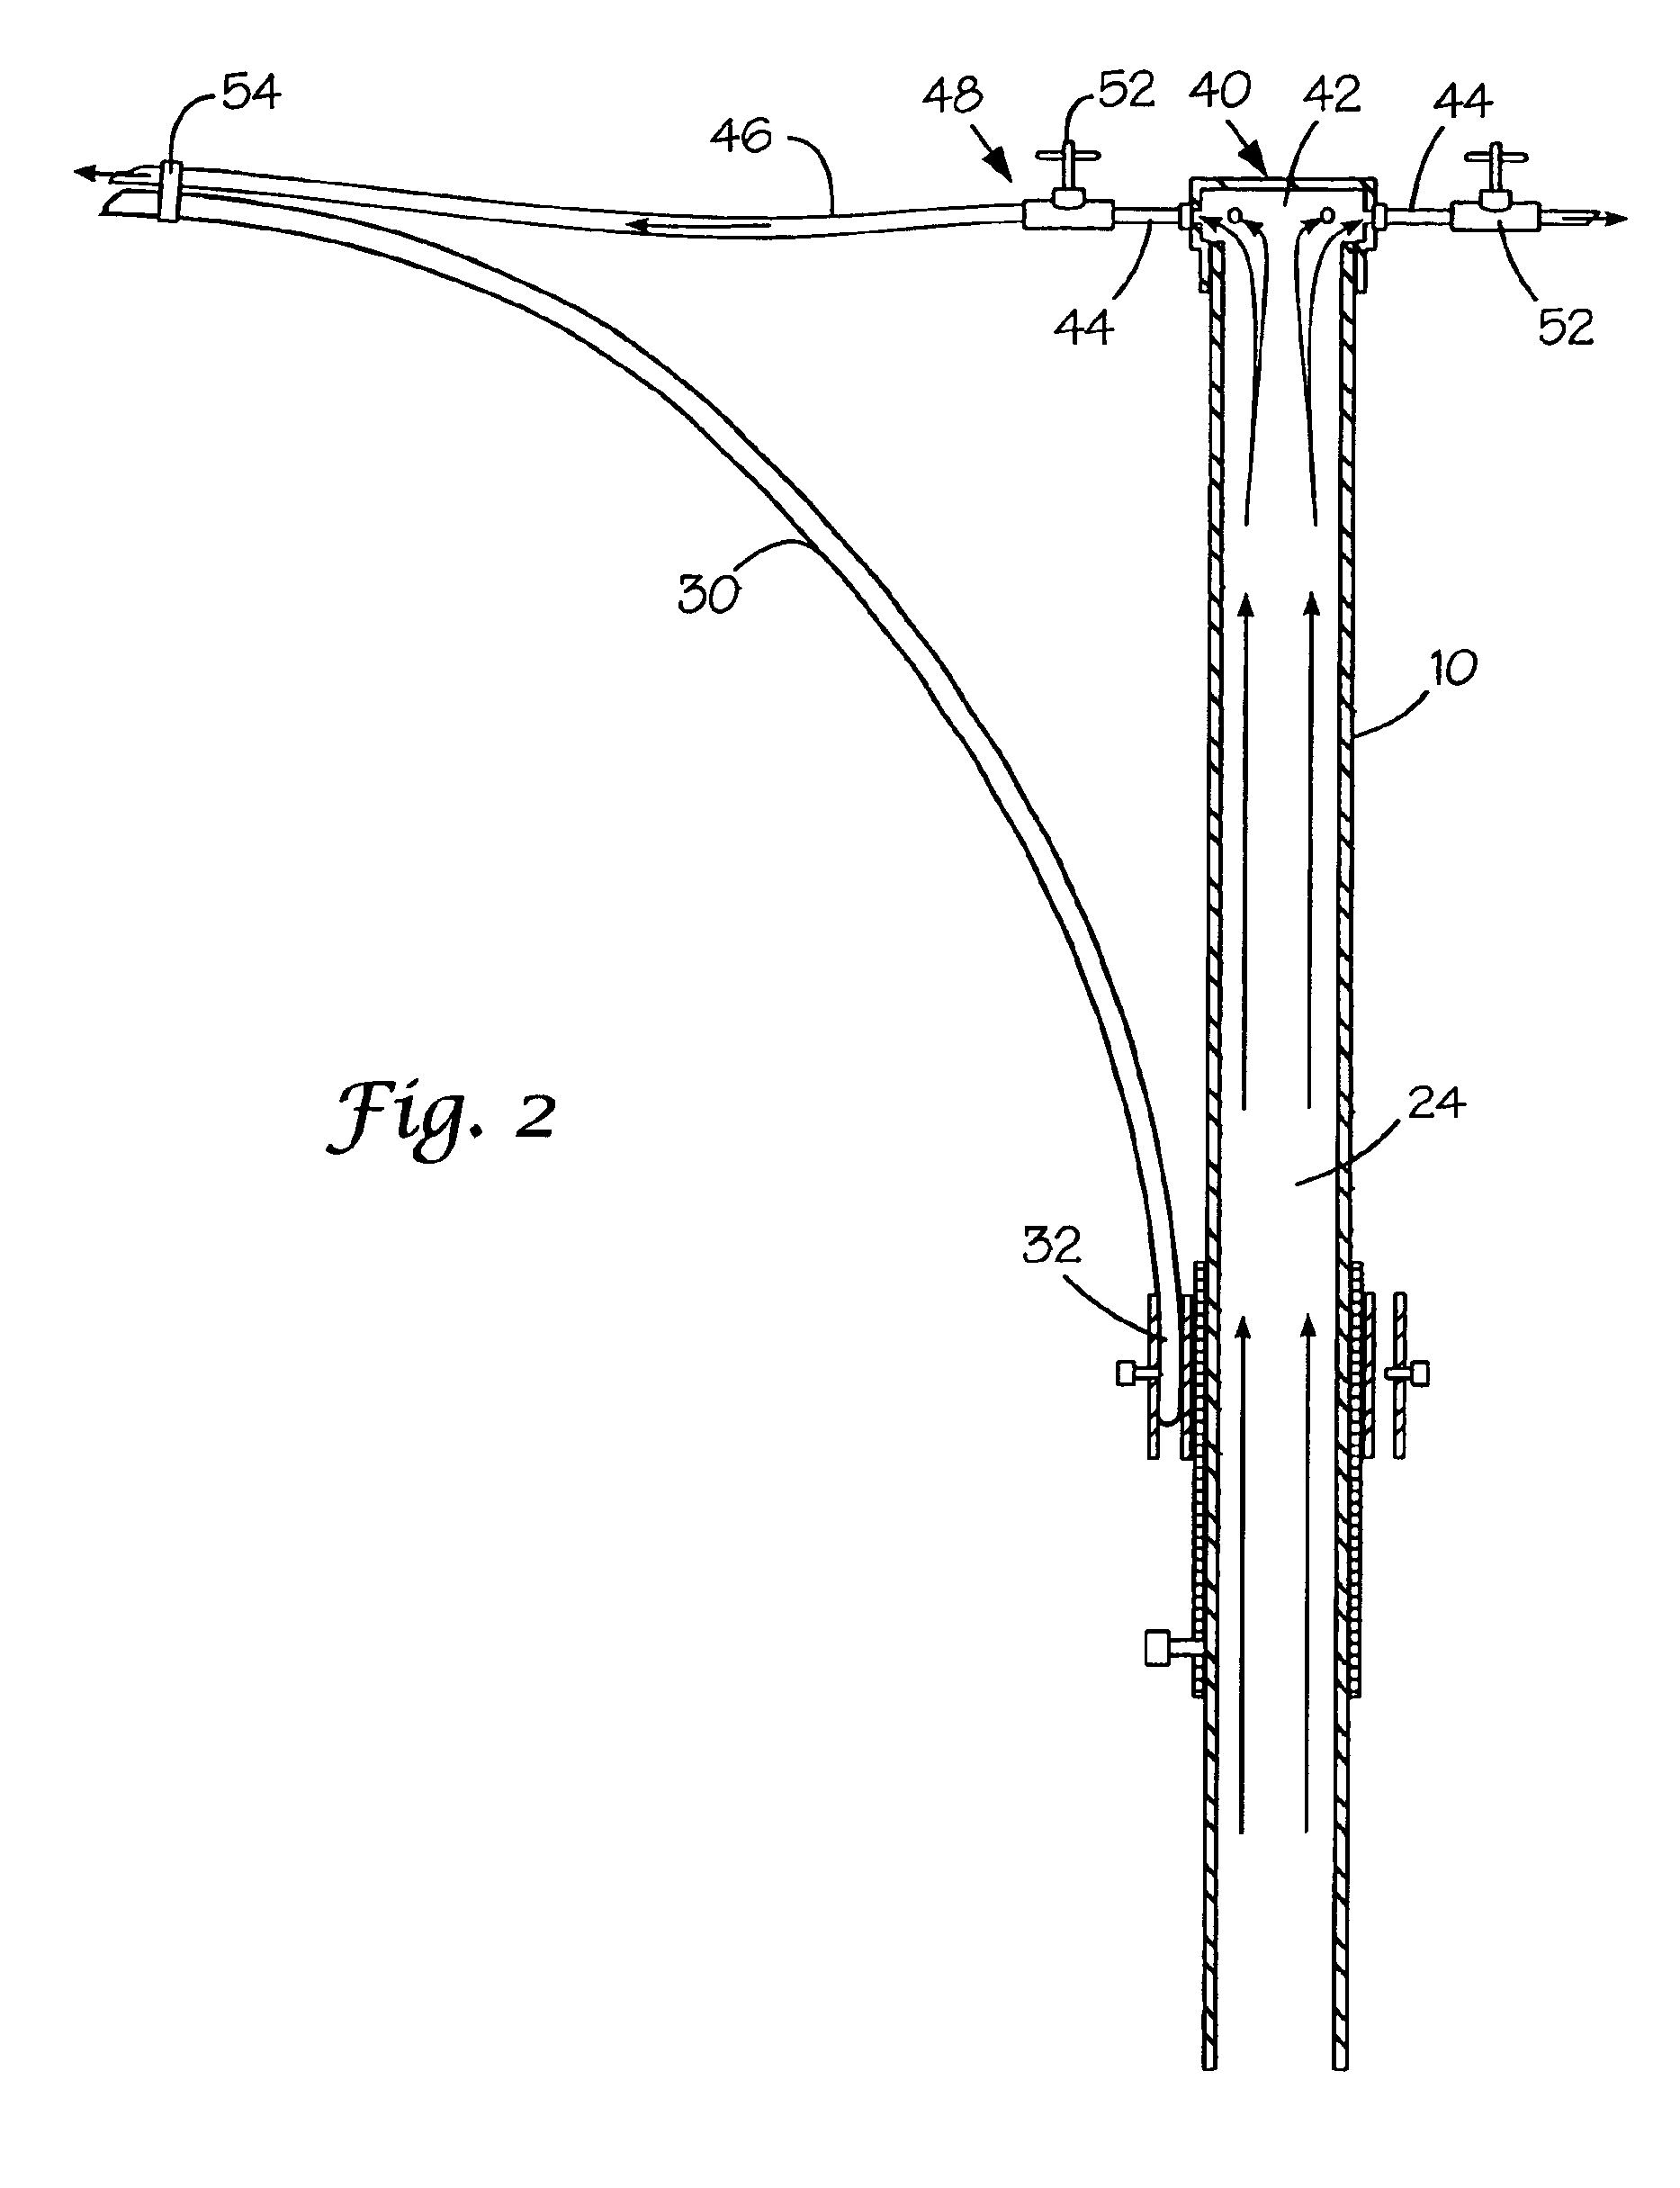 Self-watering plant carrying apparatus